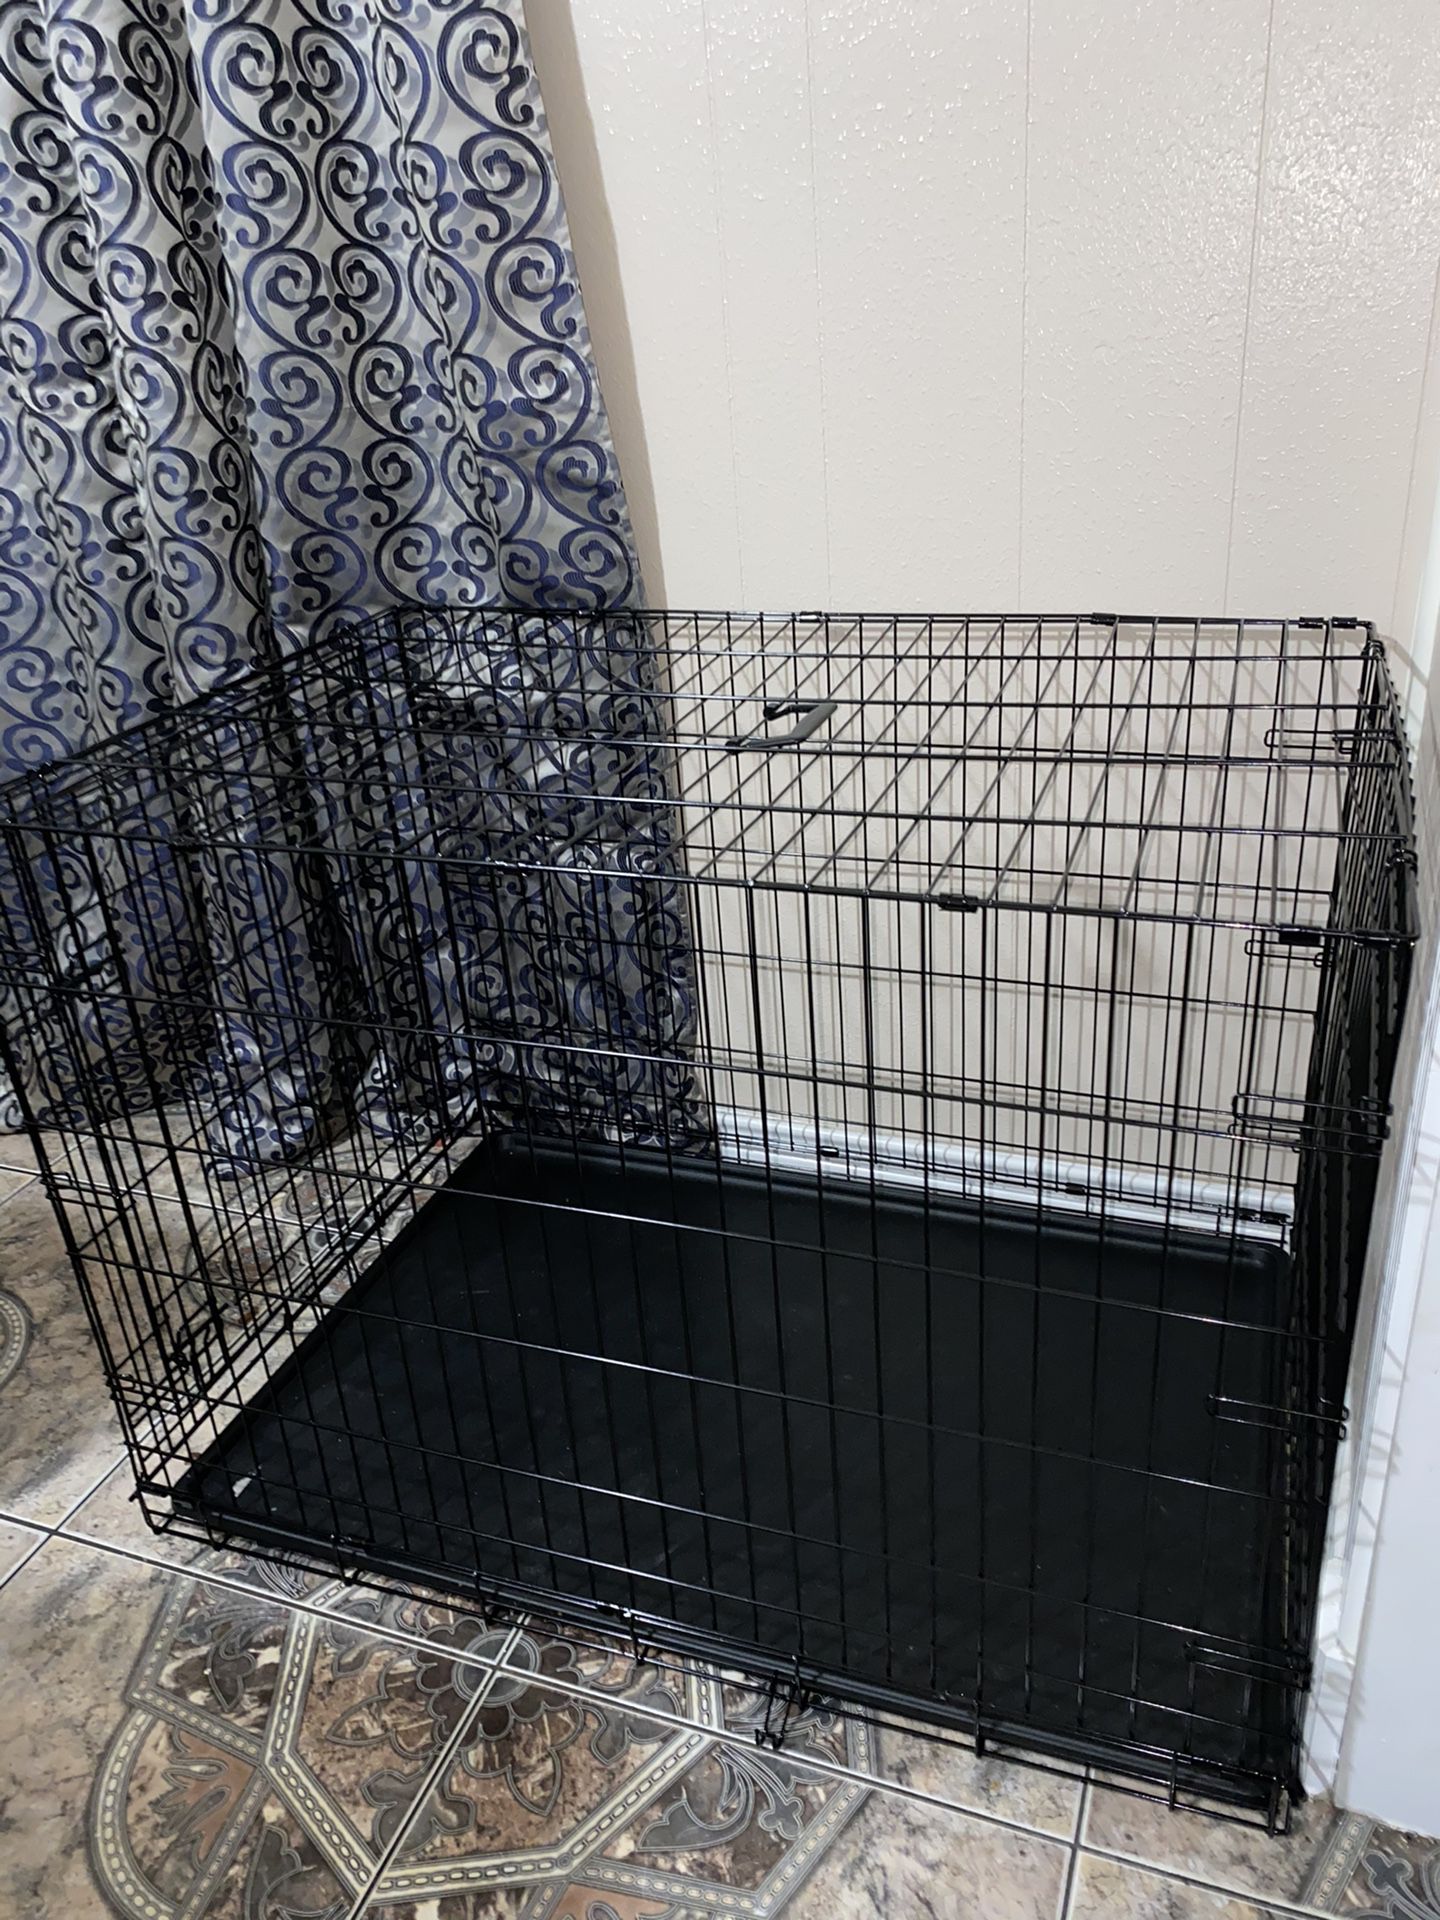 New 42” Dog Crate